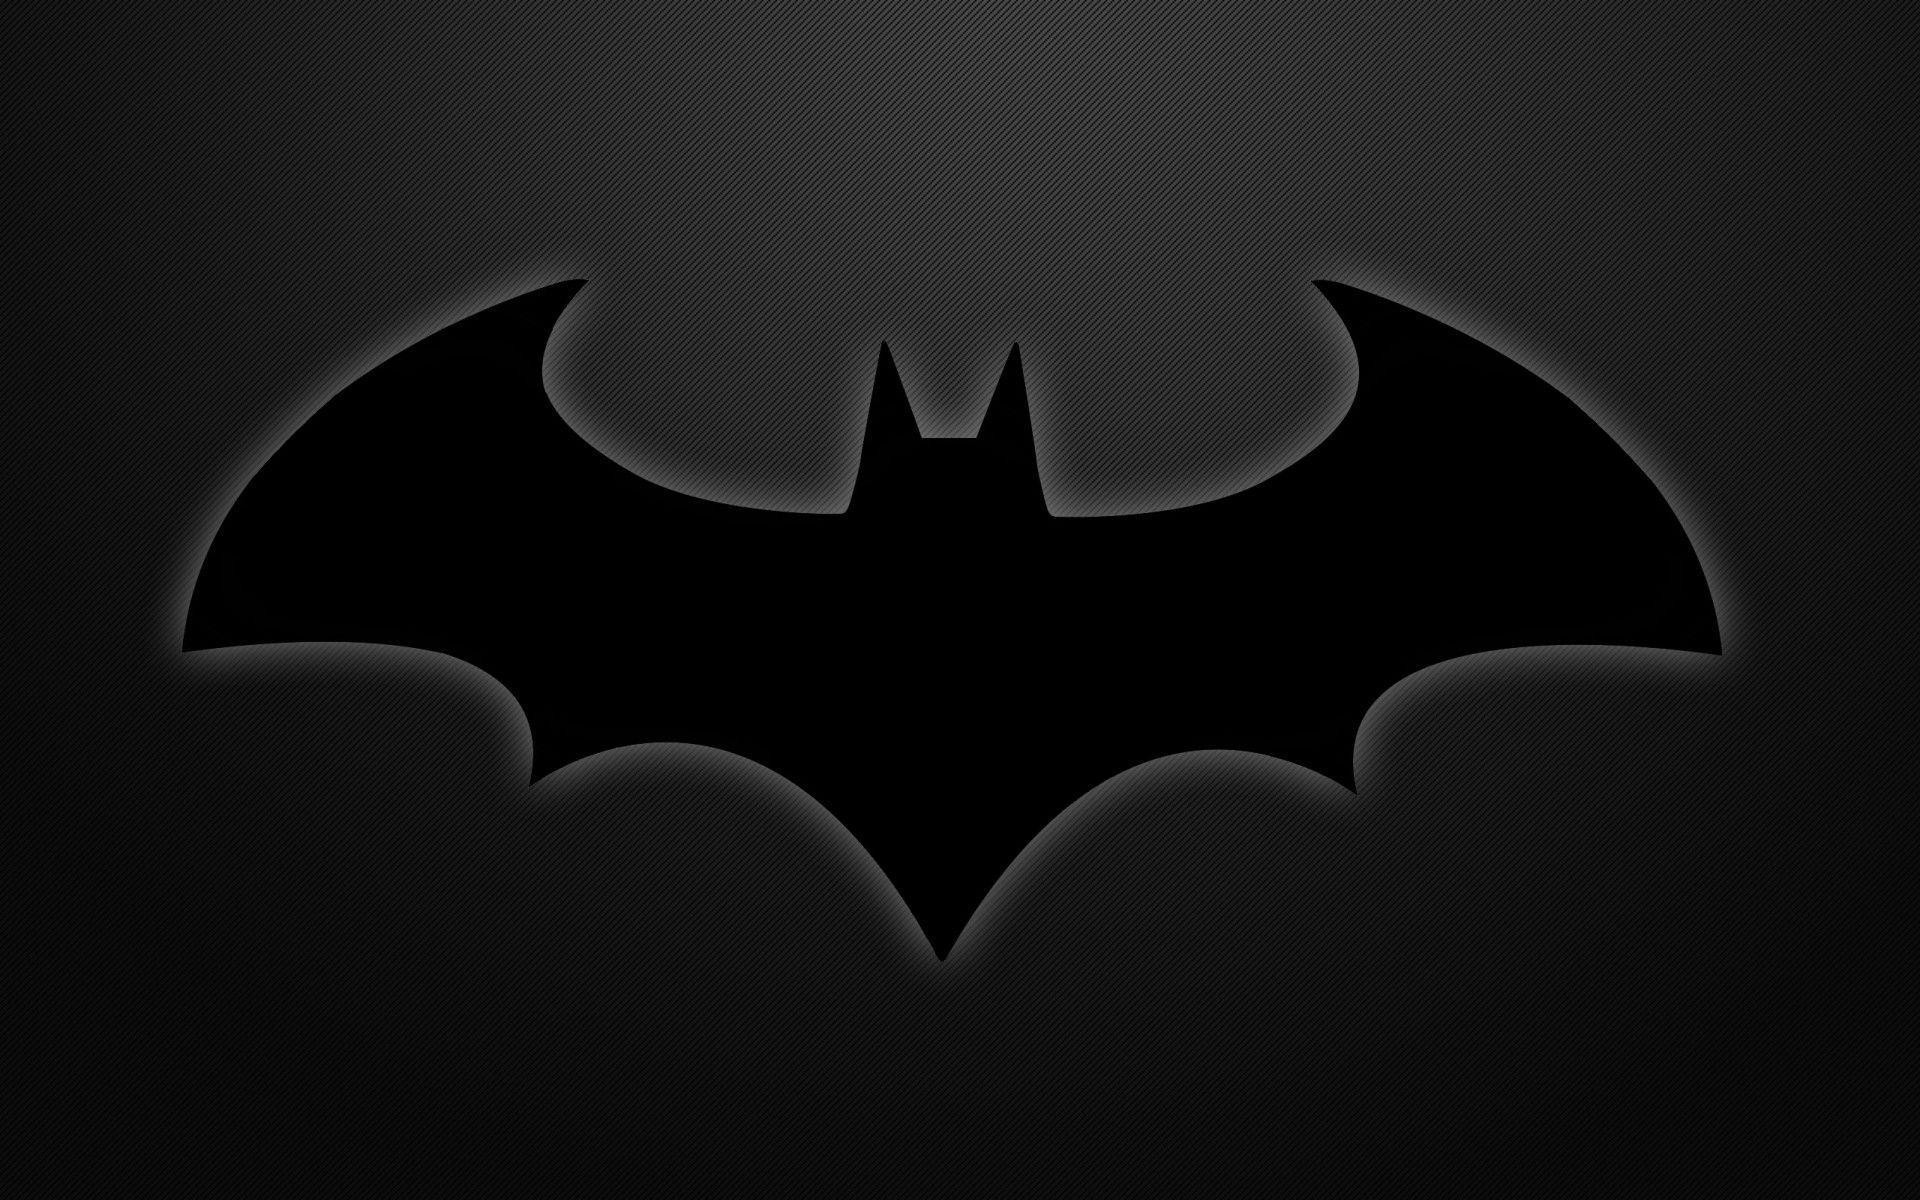 Batman Symbol Wallpaper High Quality Resolutions Wallpapers and